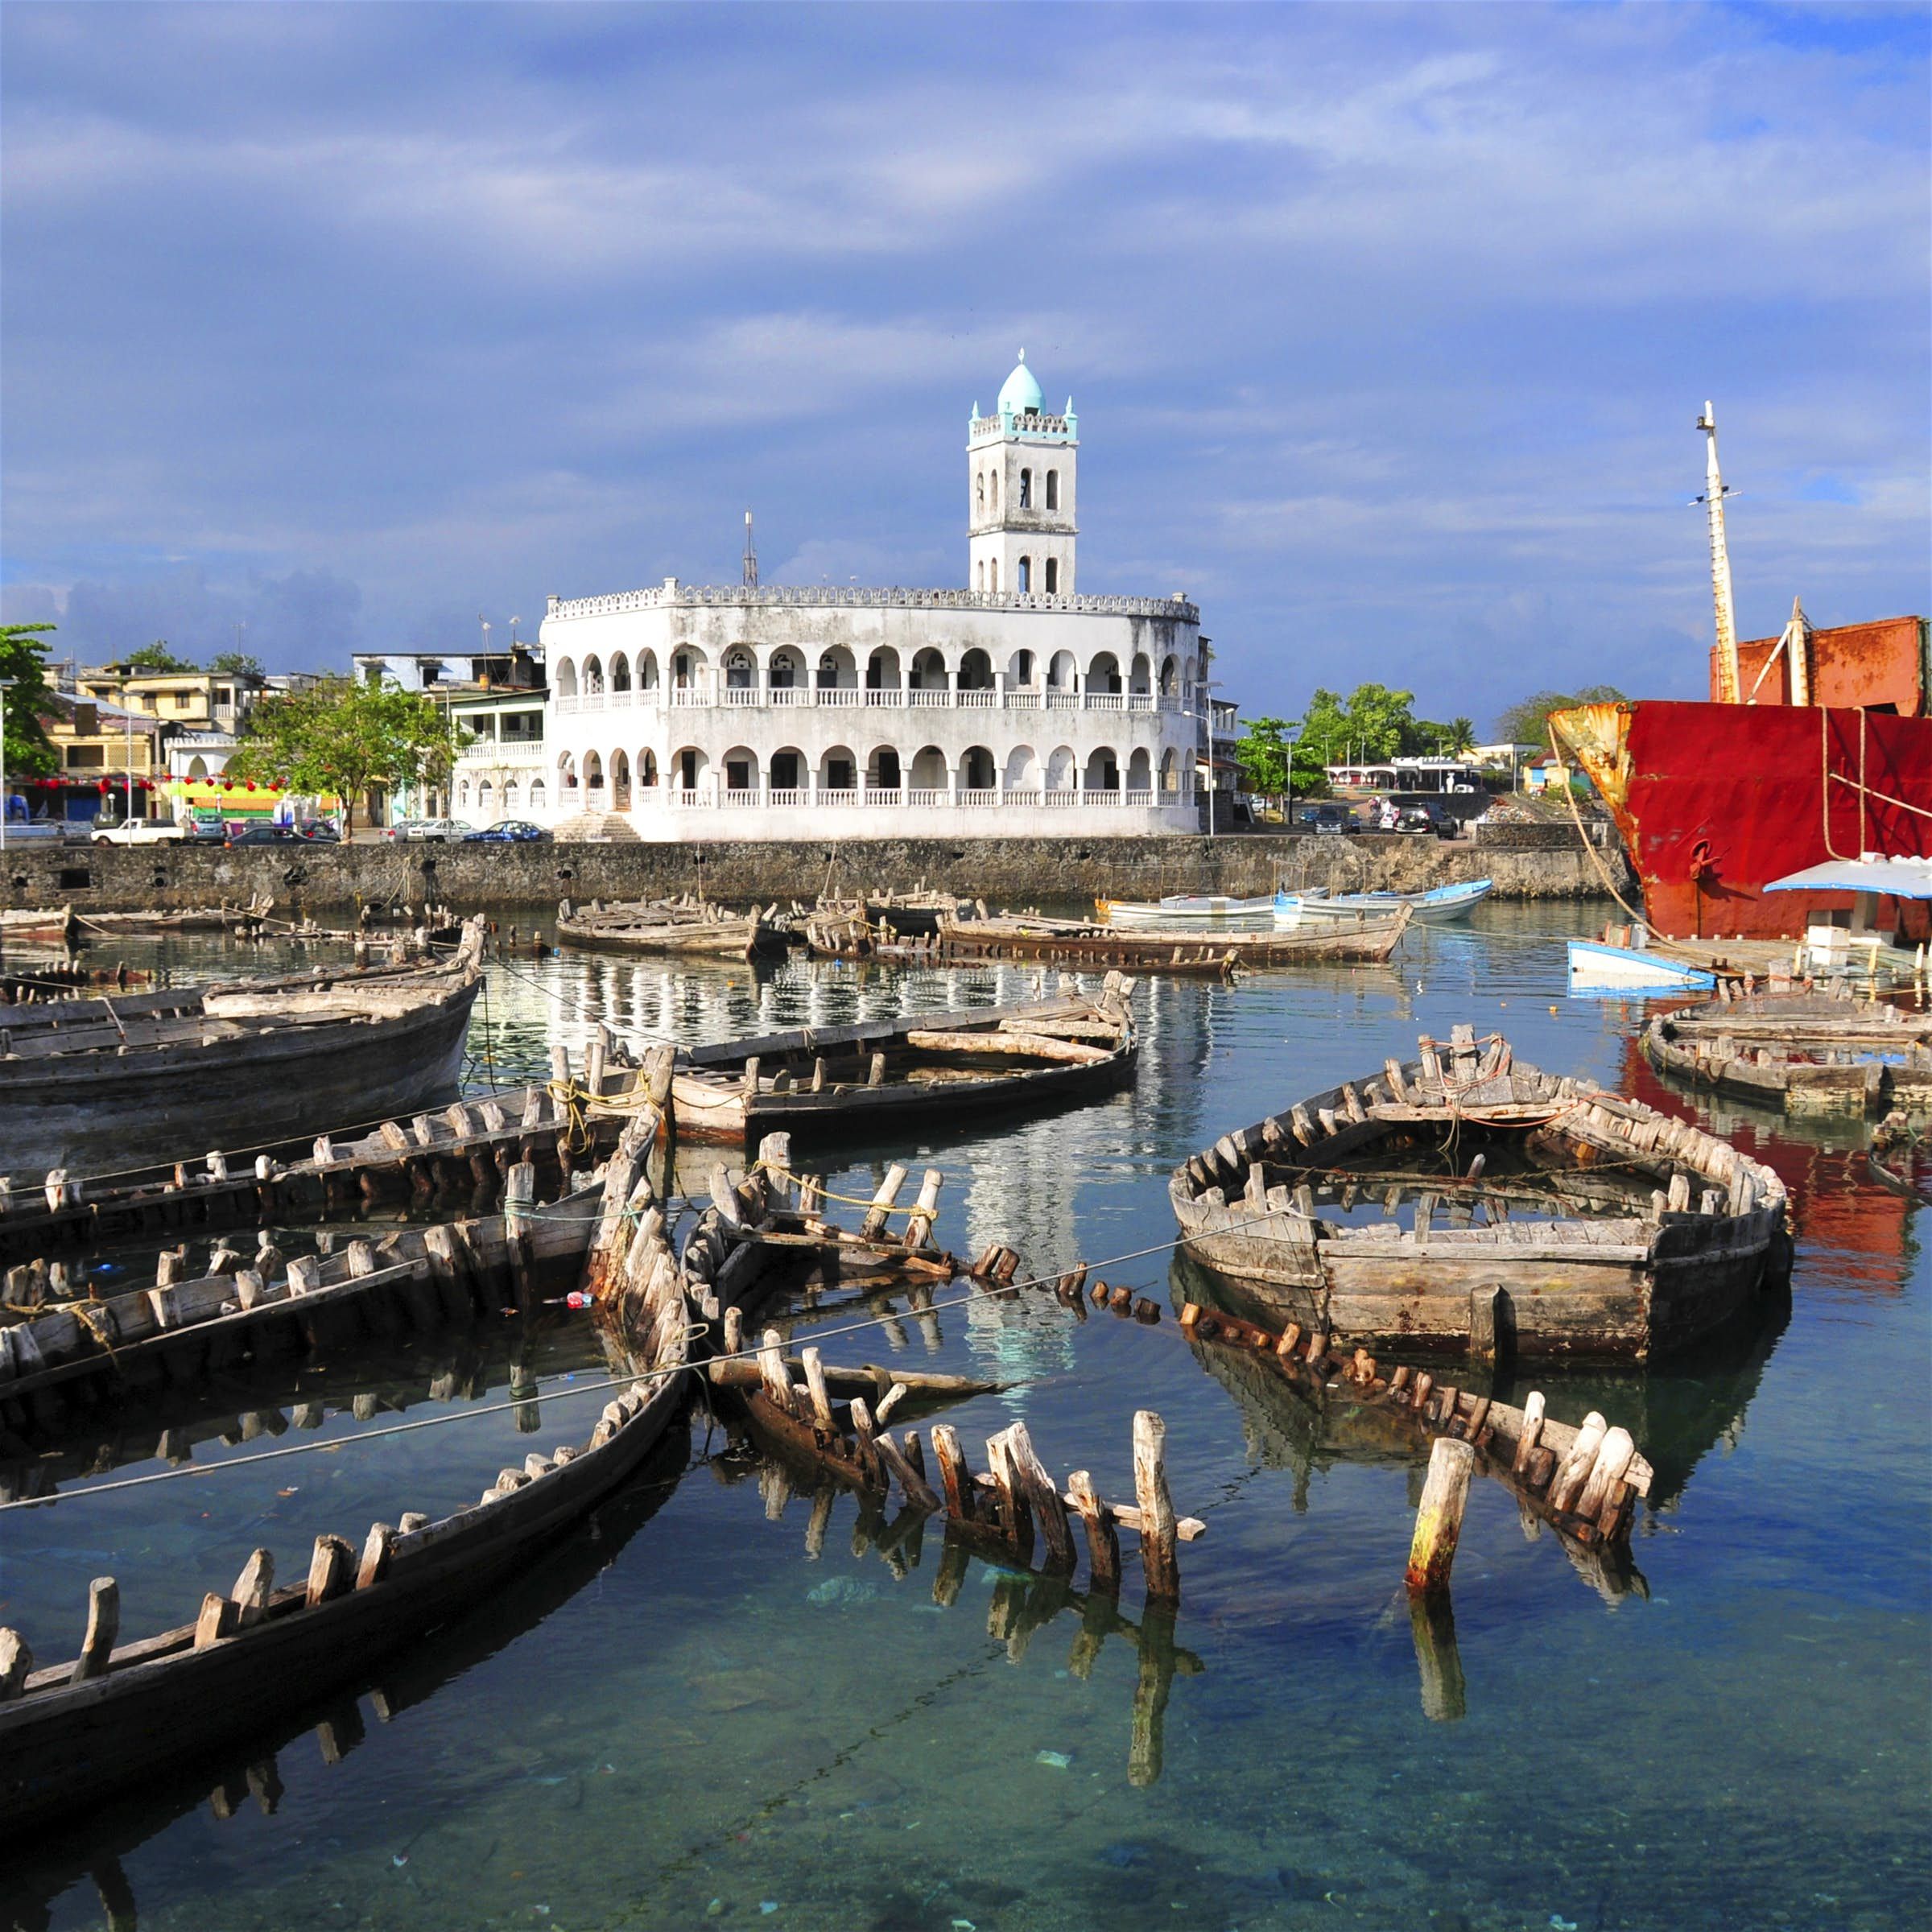 The World's Least Visited Countries - The Comoros